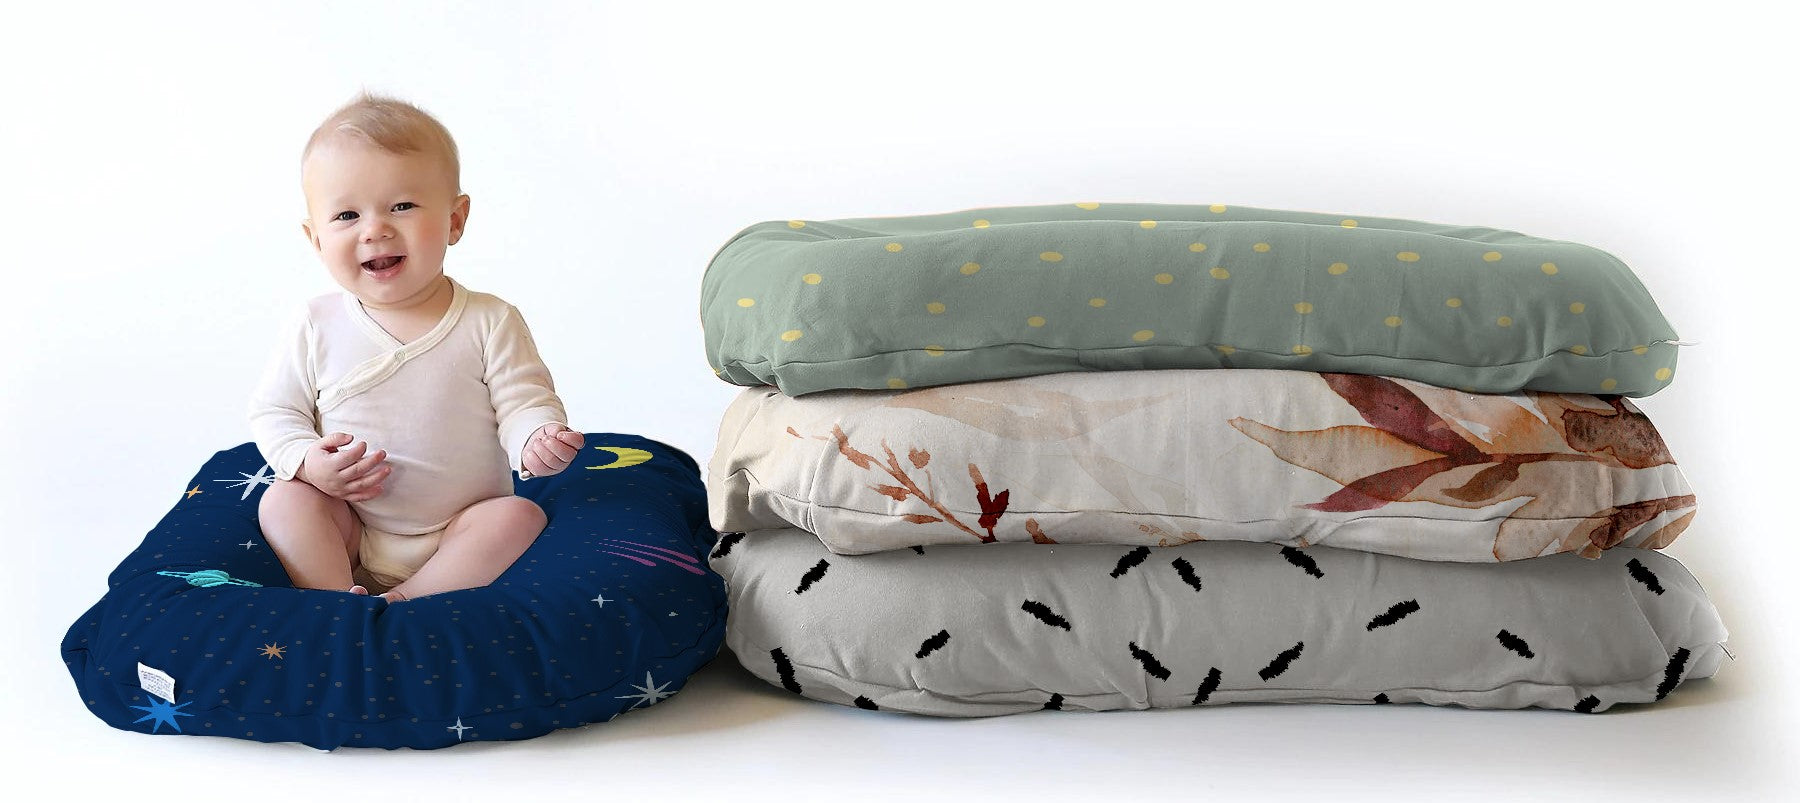 Why Baby Lounger is a Must-Have for Any Parent